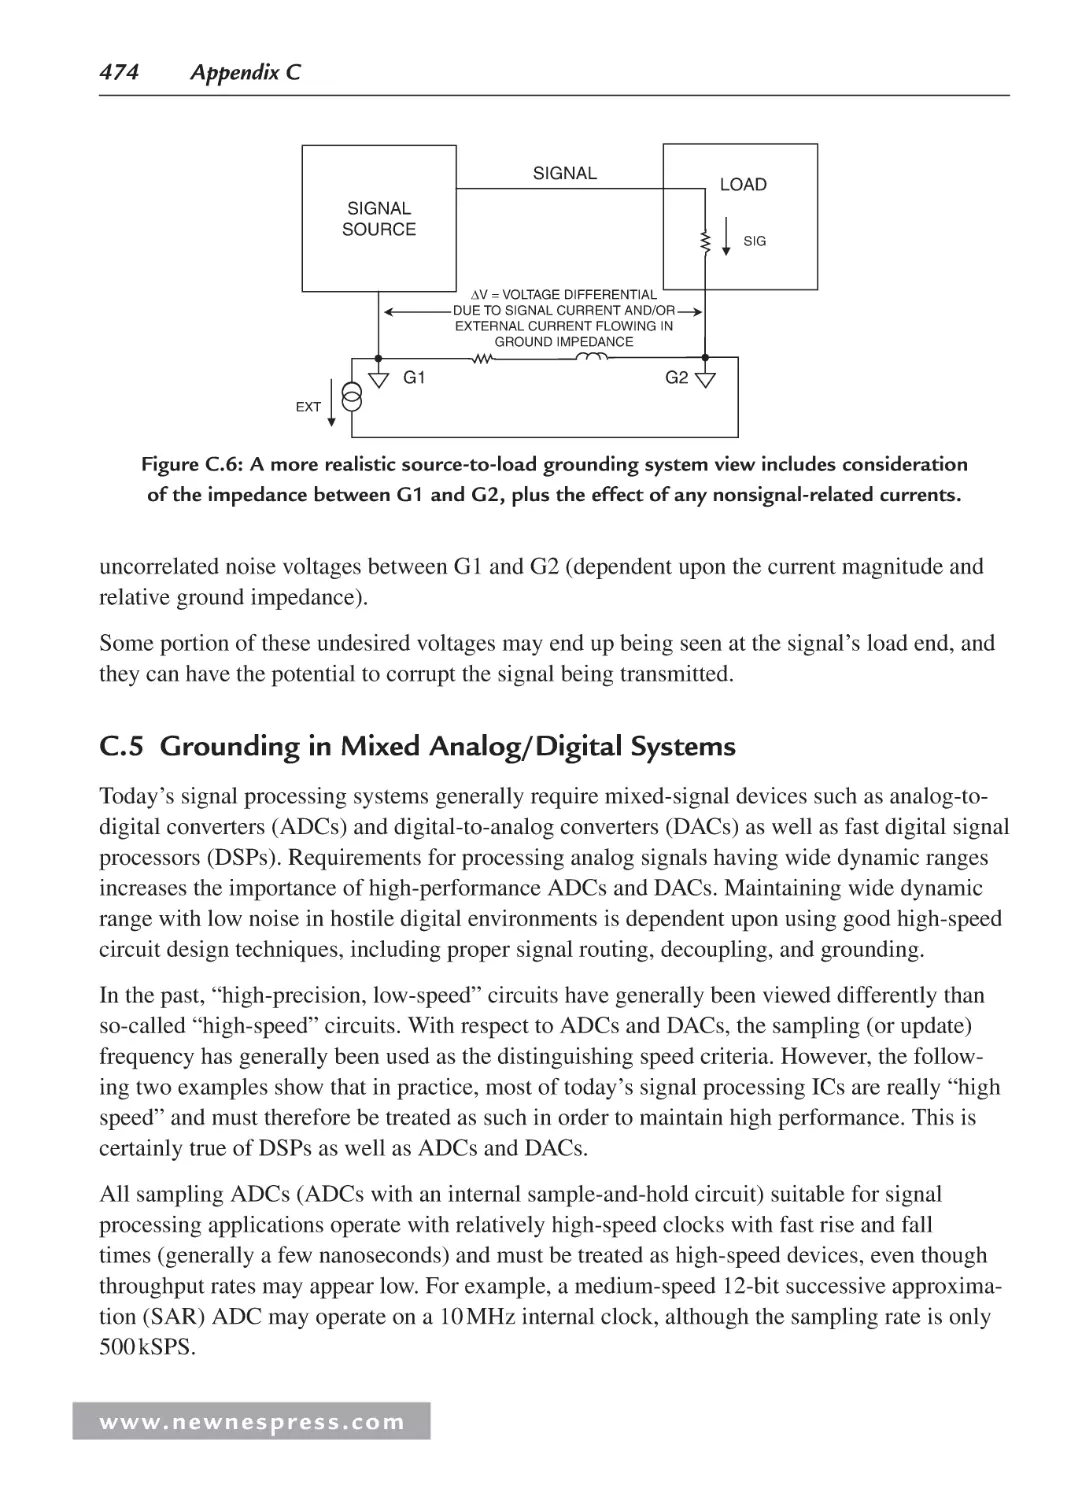 C.5 Grounding in Mixed Analog/Digital Systems